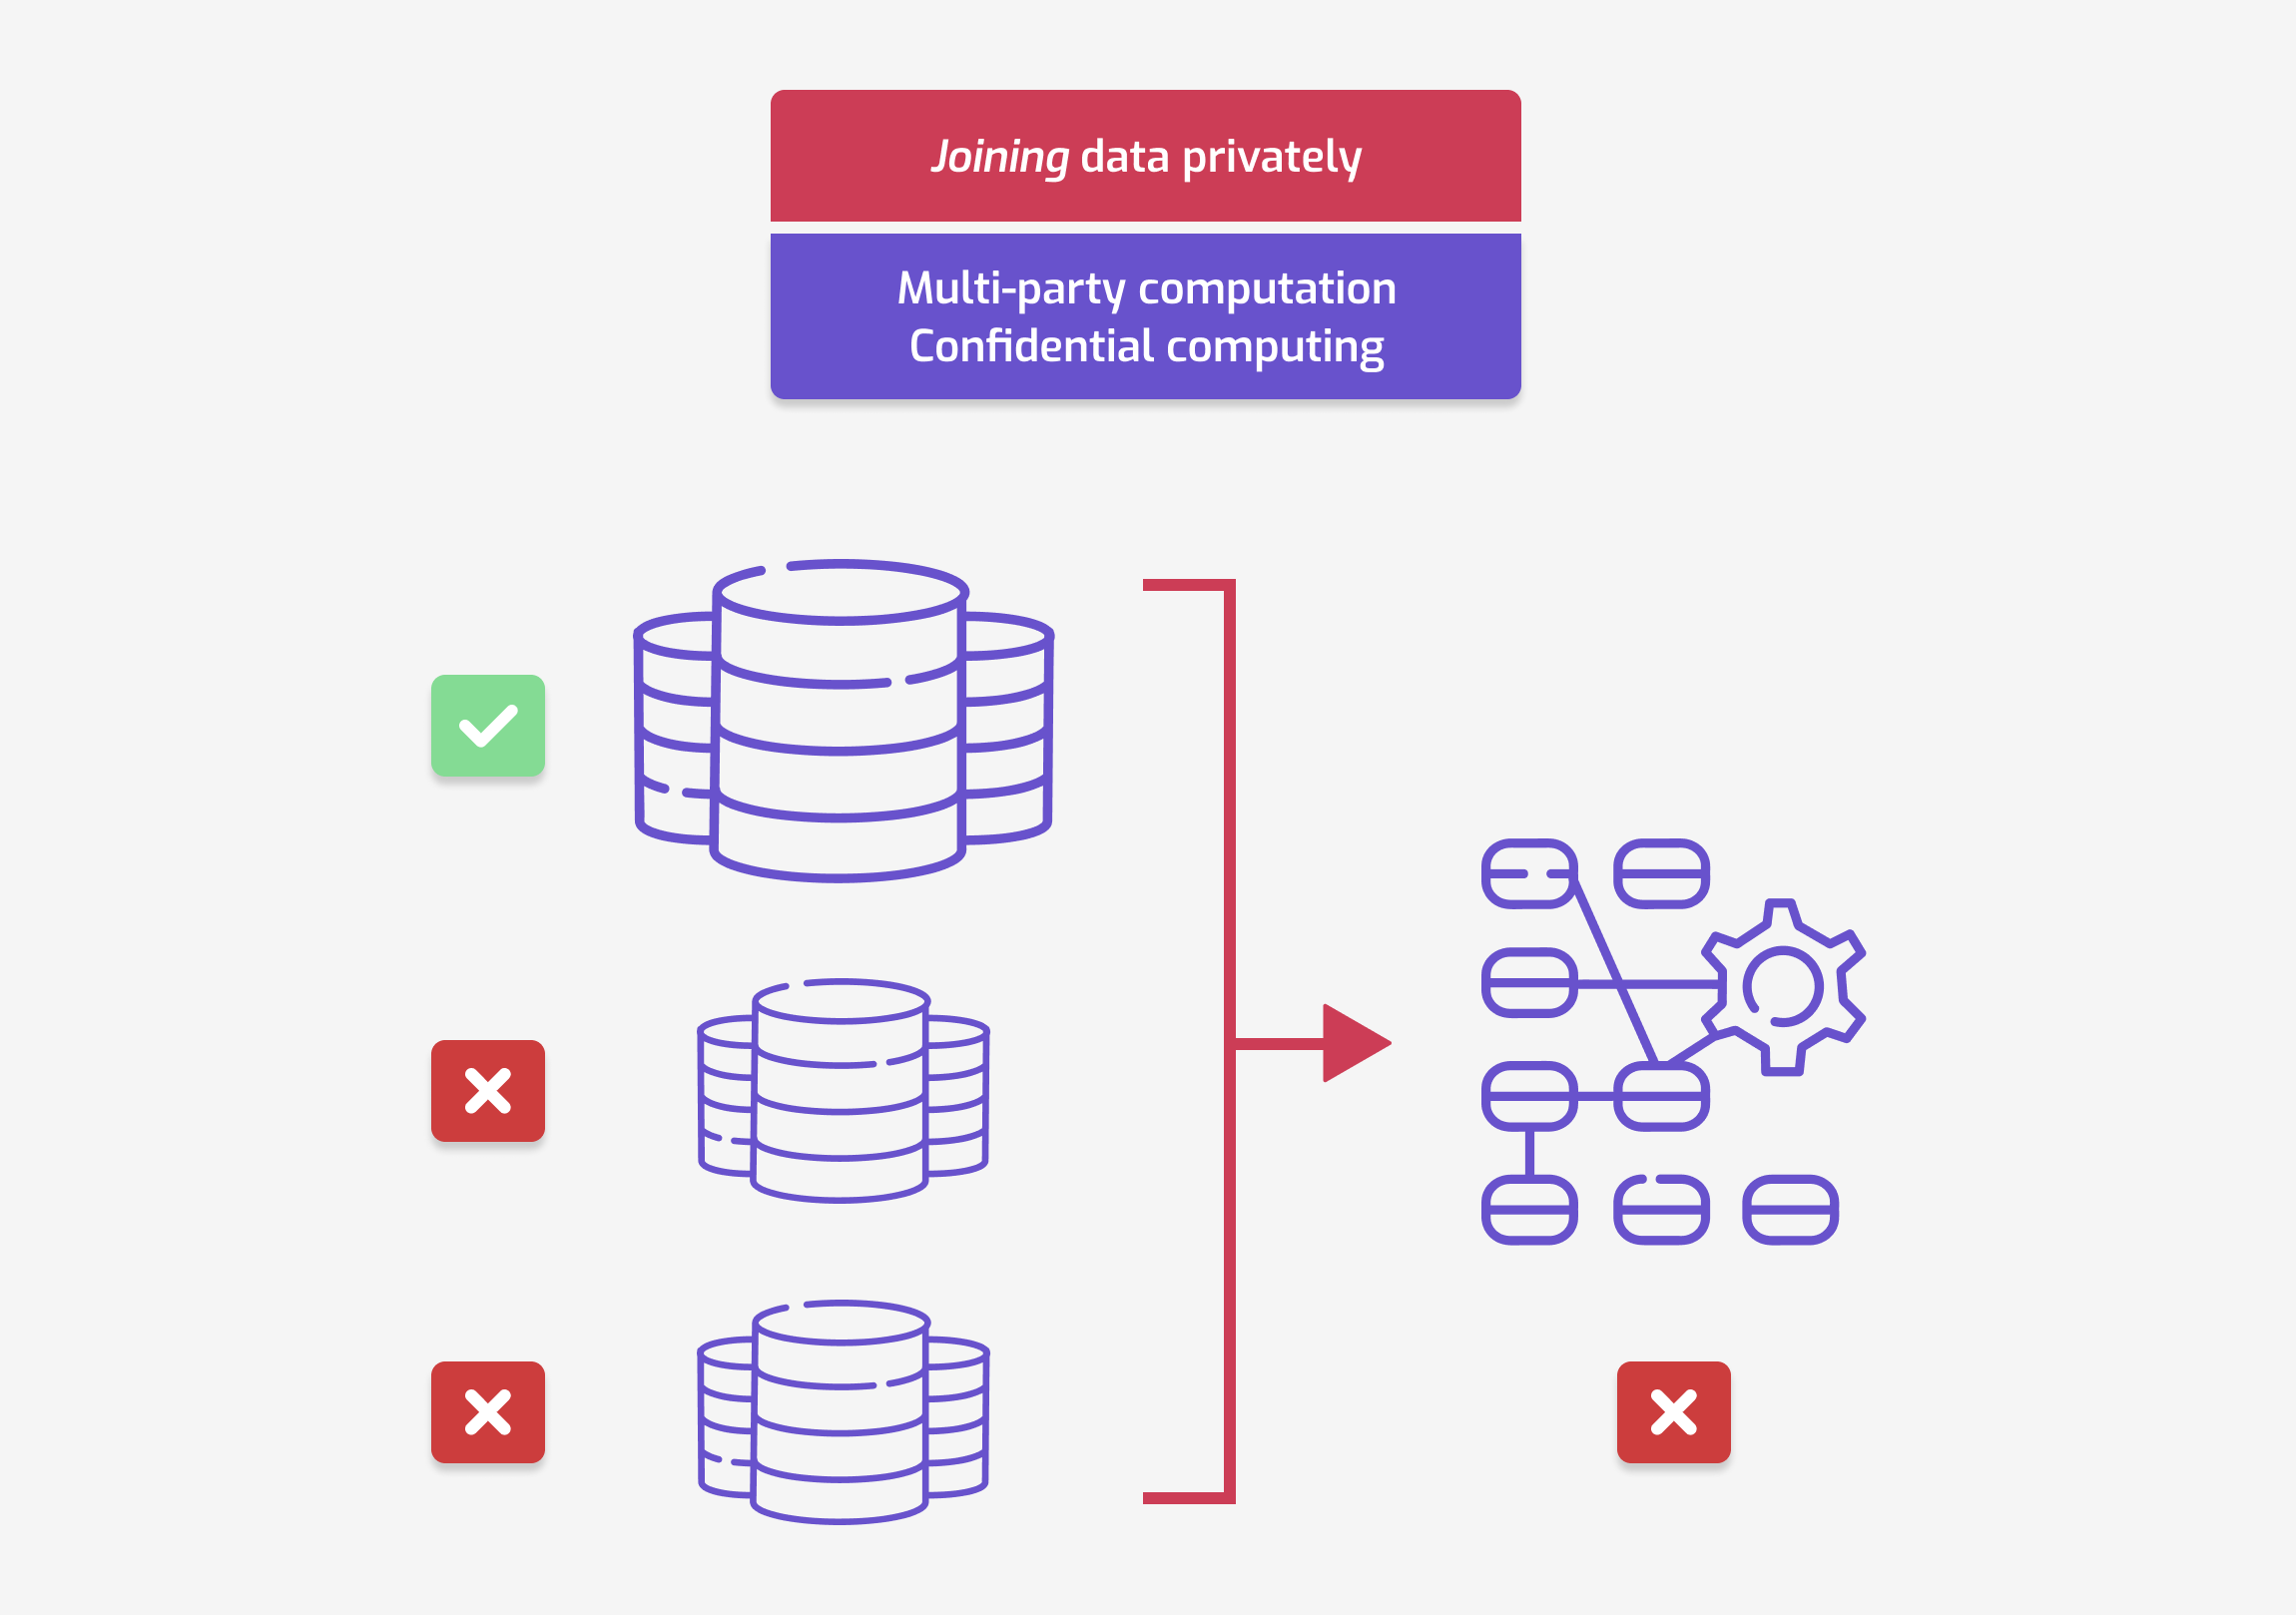 A diagram representing private data joins. Three database icons are on the
left, the first one being larger than others. Arrows point from each database
icon to a "computation" icon. A green check mark is under the first bigger
database icon; forbidden signs are below the other two databases, and the
computation icon. The diagram is labeled "Joining data privately: multi-party
computation, confidential
computing".